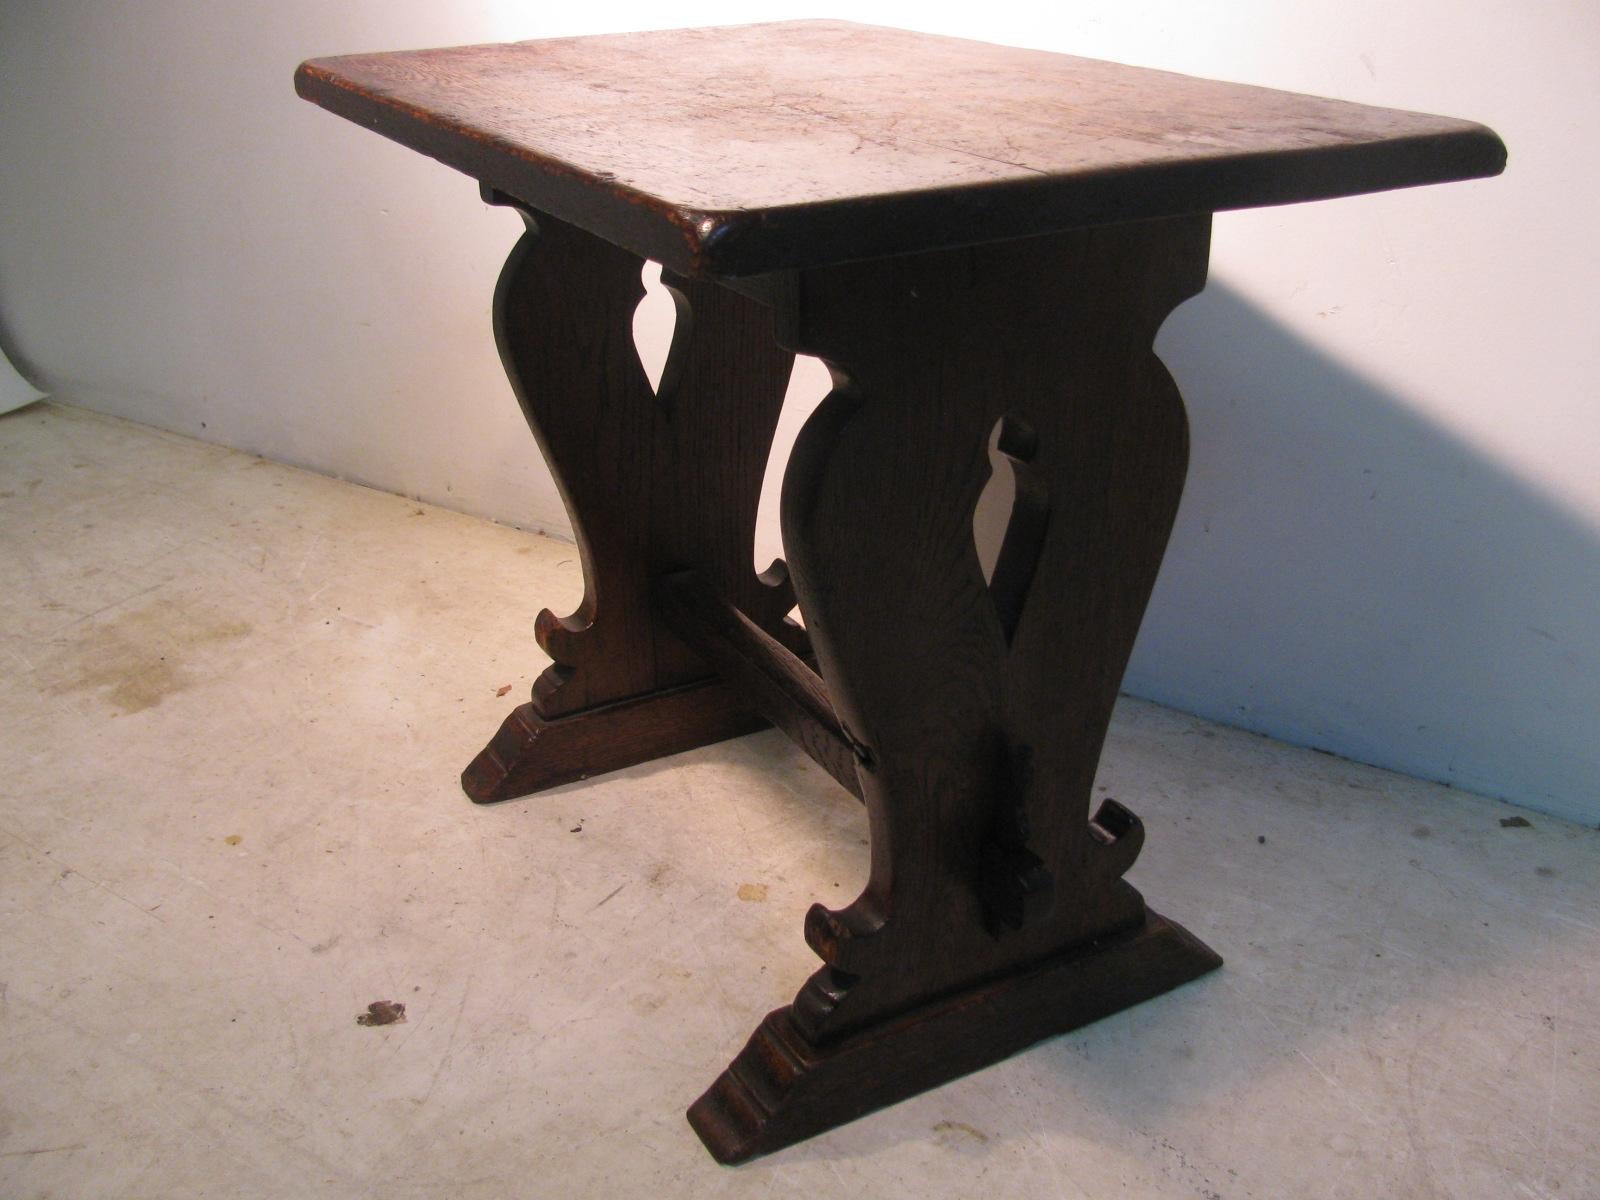 Fabulous and versatile side table or little bench. Period Arts & Crafts handmade during the Mission period. Mortise and tenon construction with keyed sides. Great style with spade cutouts. Perfect for the cabin or as a side table by the fireplace.